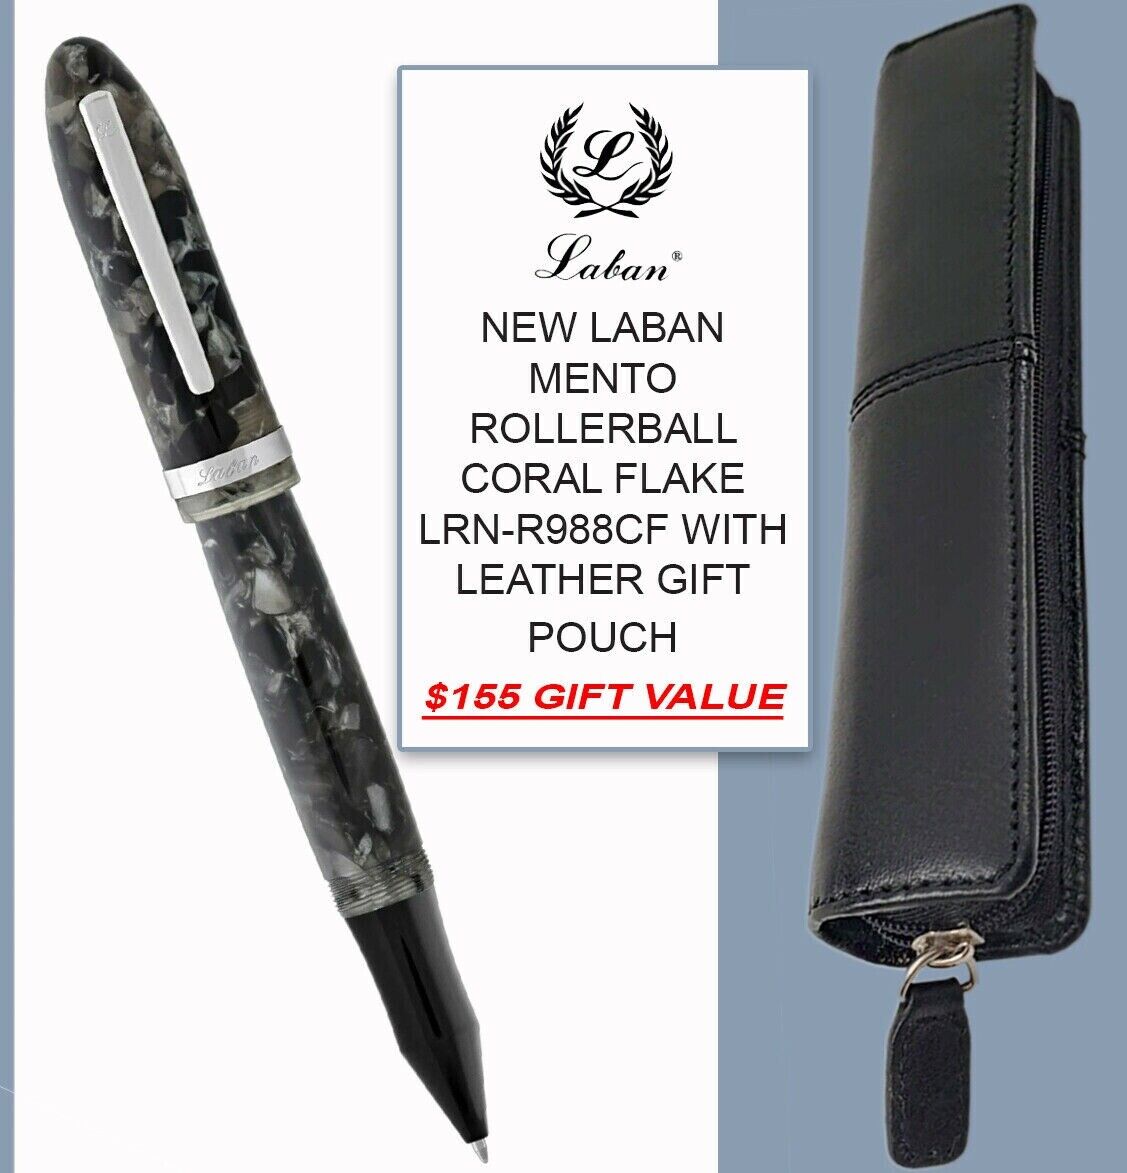 NEW CORAL FLAKE LABAN MENTO ROLLERBALL LRN-R988CF & LEATHER POUCH - $155 VALUE